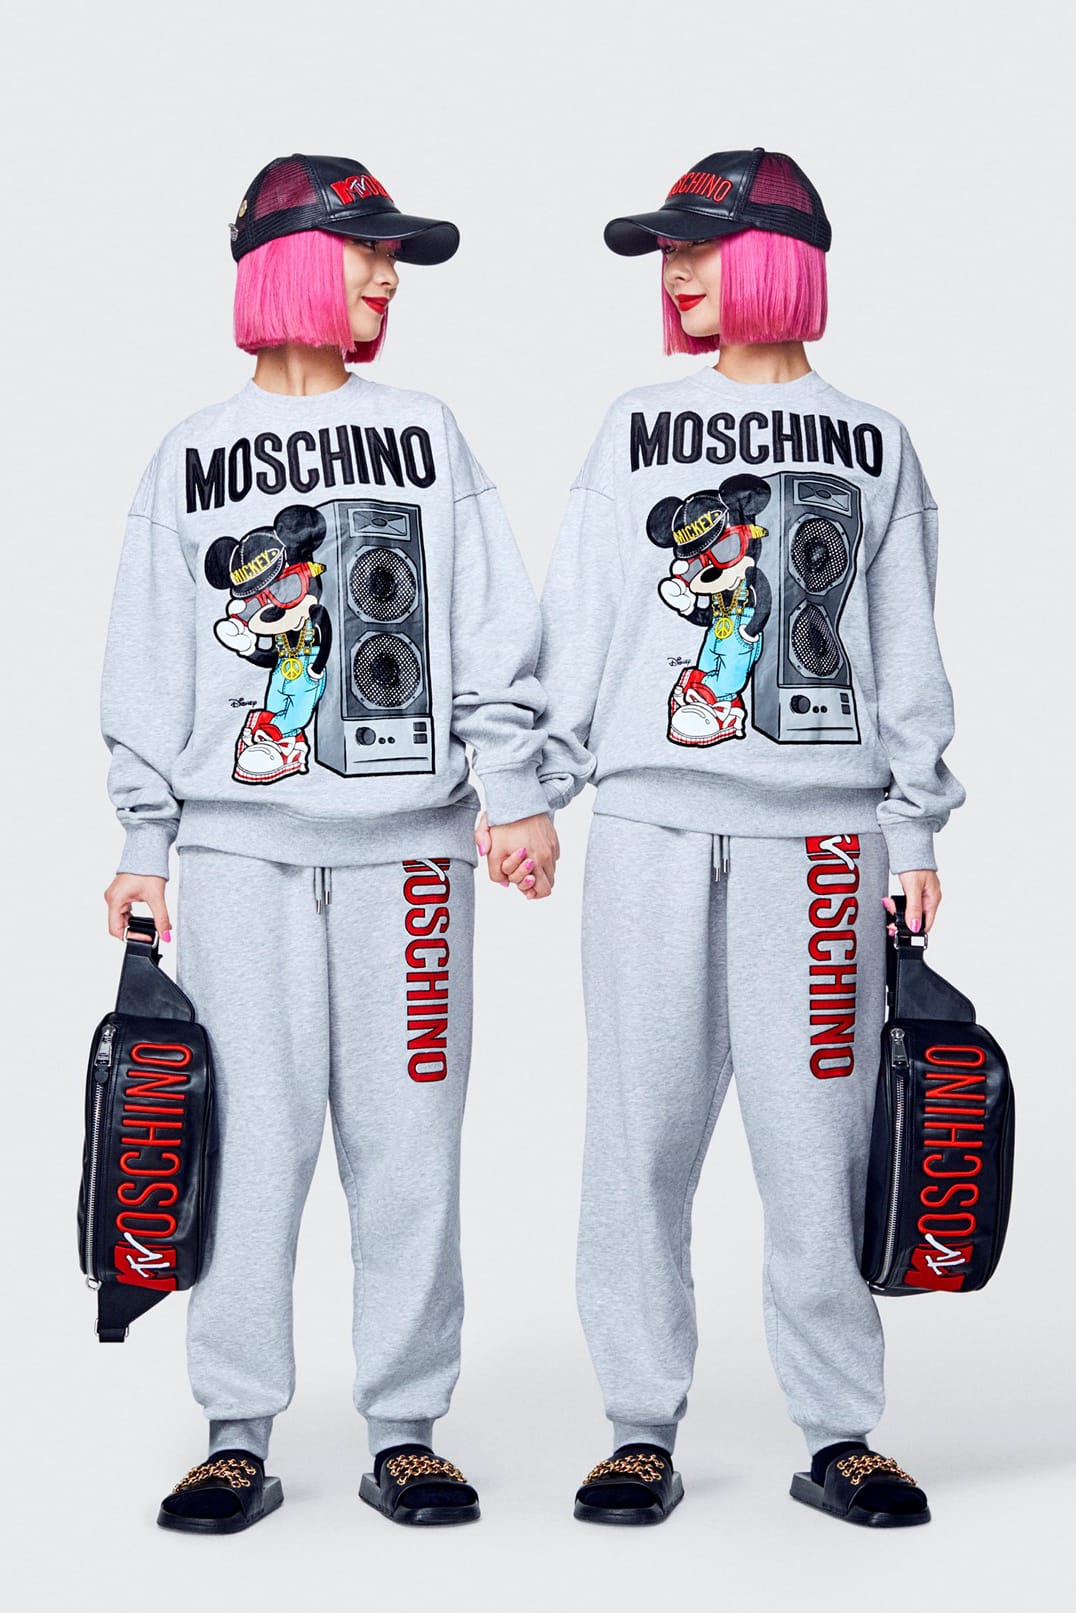 Moschino x H\u0026M Reveal Collection 